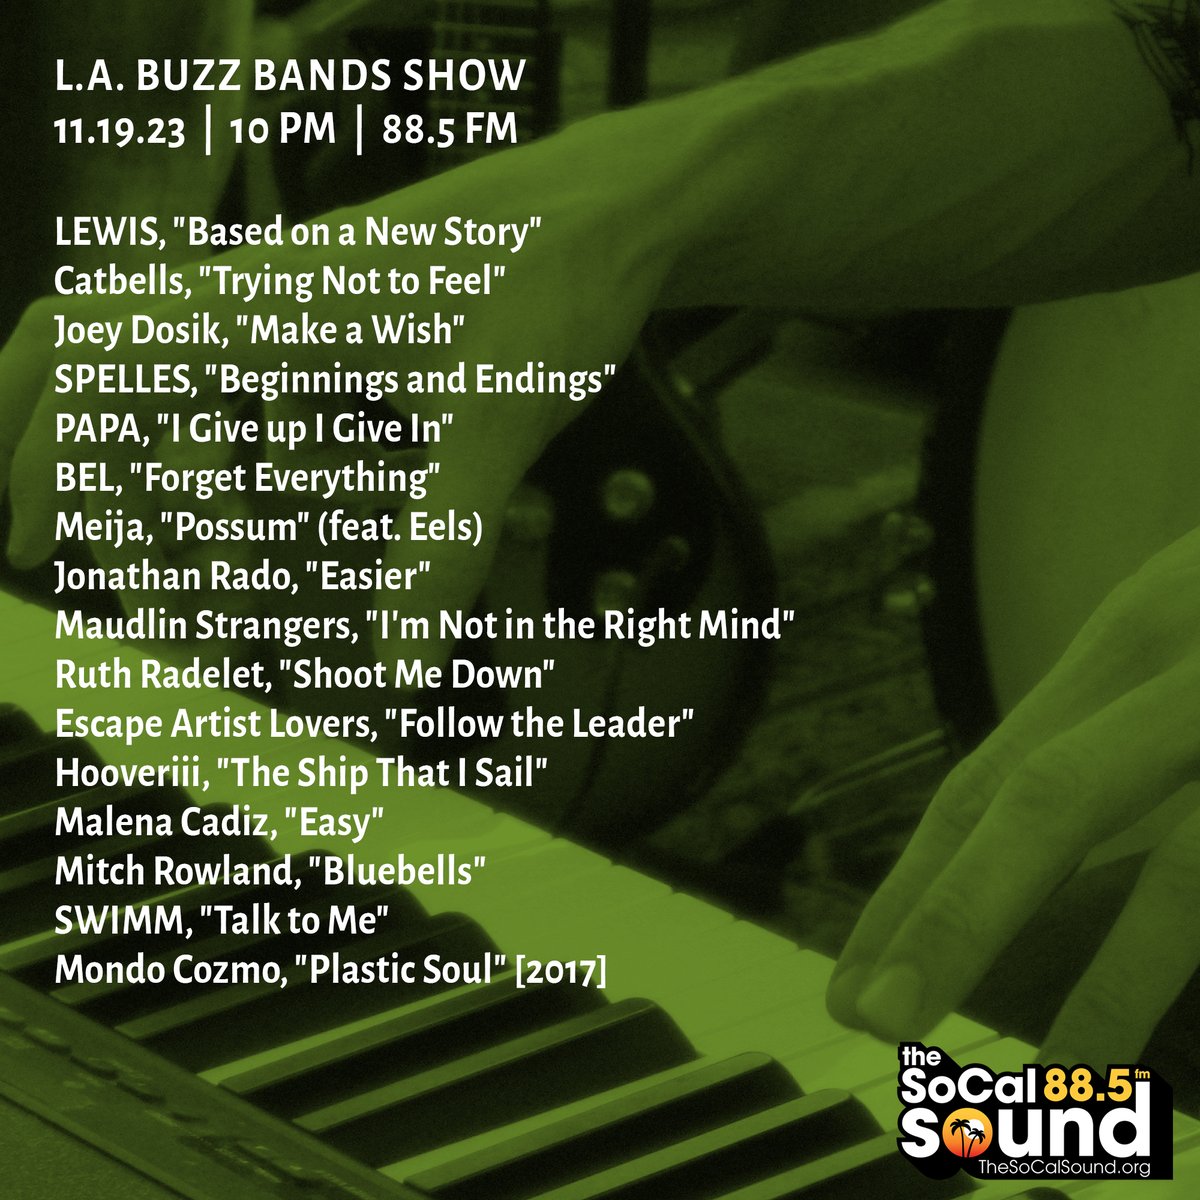 Coming at 10PM: @BuzzBandsLA Show on 88.5 FM @TheSoCalSound, ft. tunes from Maudlin Strangers, Catbells, SPELLES, Jonathan Rado, Mondo Cozmo, PAPA, Ruth Radelet, Escape Artist Lovers, Malena Cadiz, BEL, Joey Dosik, LEWIS, Hooveriii, Meija (ft. Eels) + more bit.ly/3SZO8QL